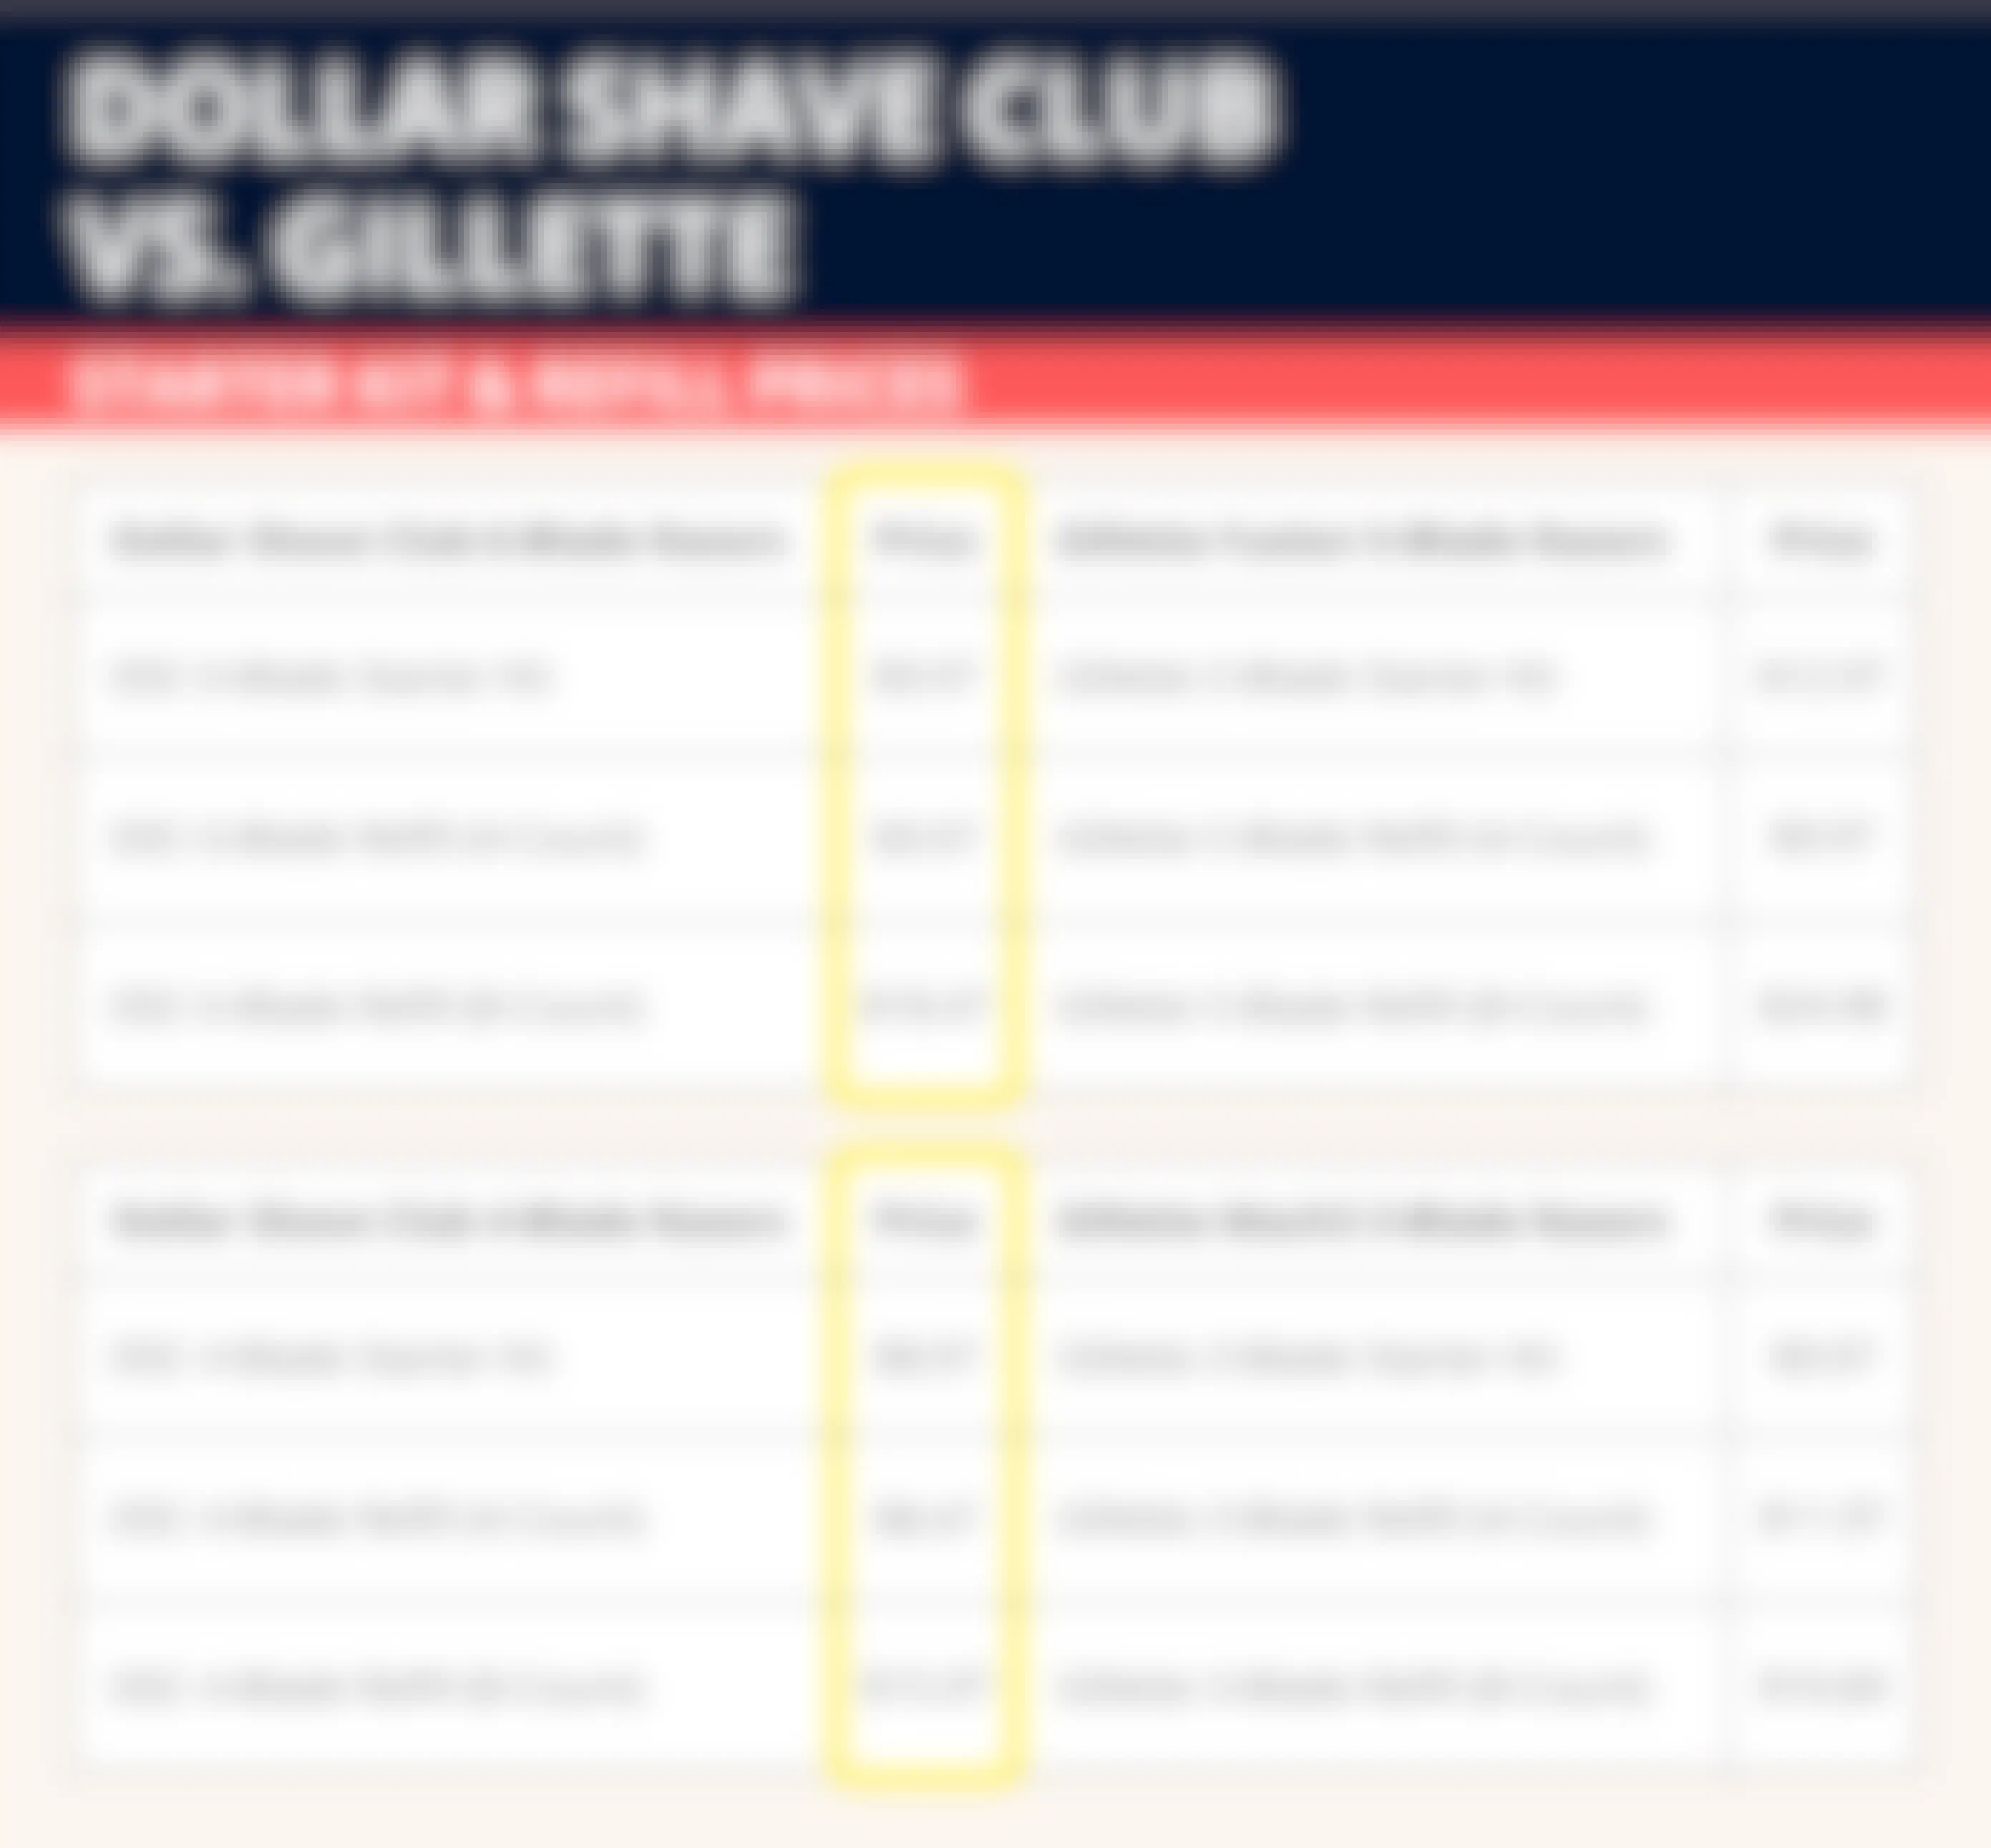 A graphic comparing the prices of Dollar Shave Club 6-blade and 4-blade razors to Gillette's 5-blade and 3-blade razors, showing that Dollar Shave Club razors are cheaper across the board